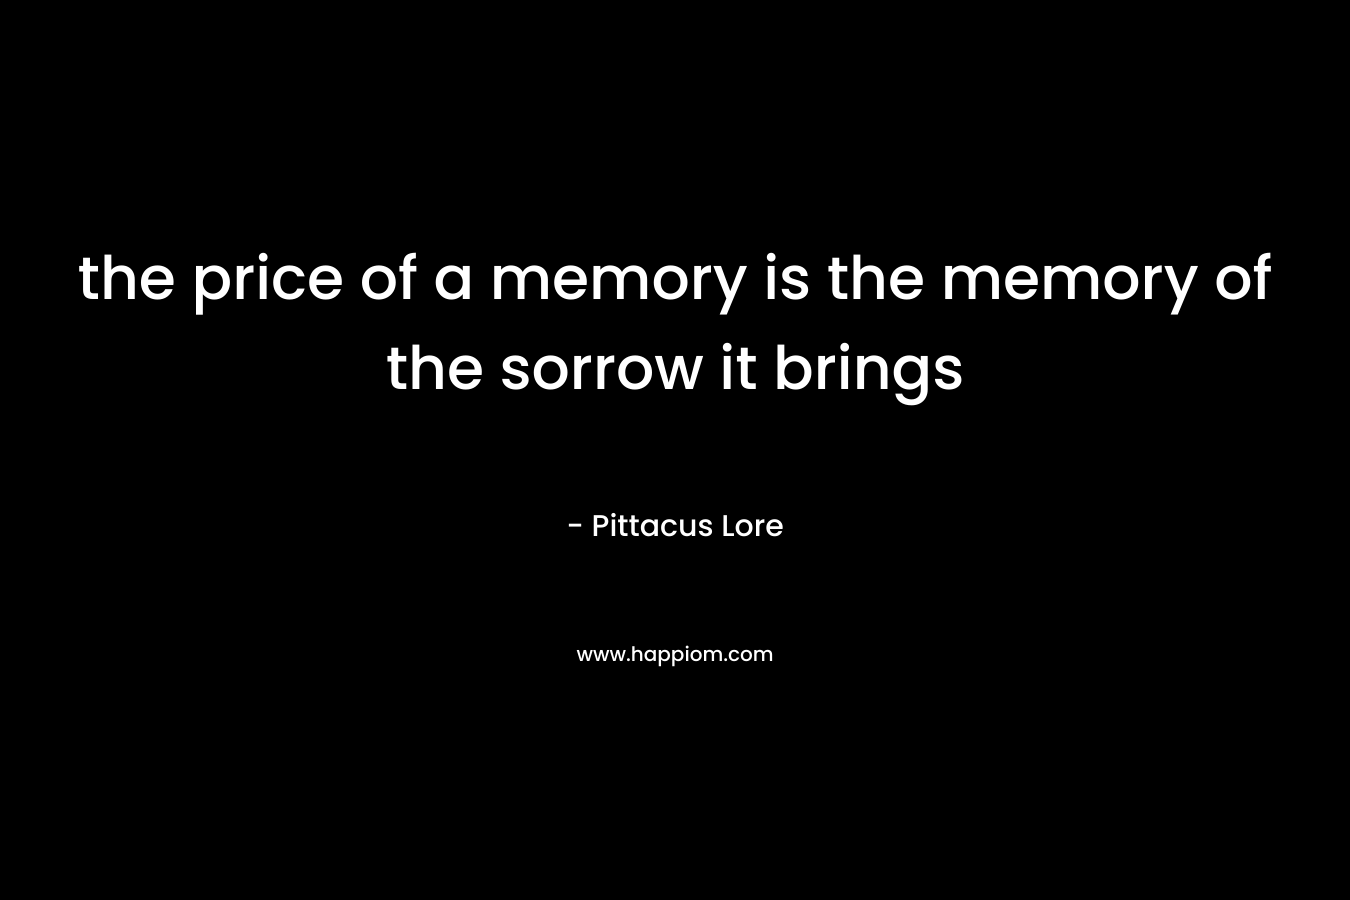 the price of a memory is the memory of the sorrow it brings